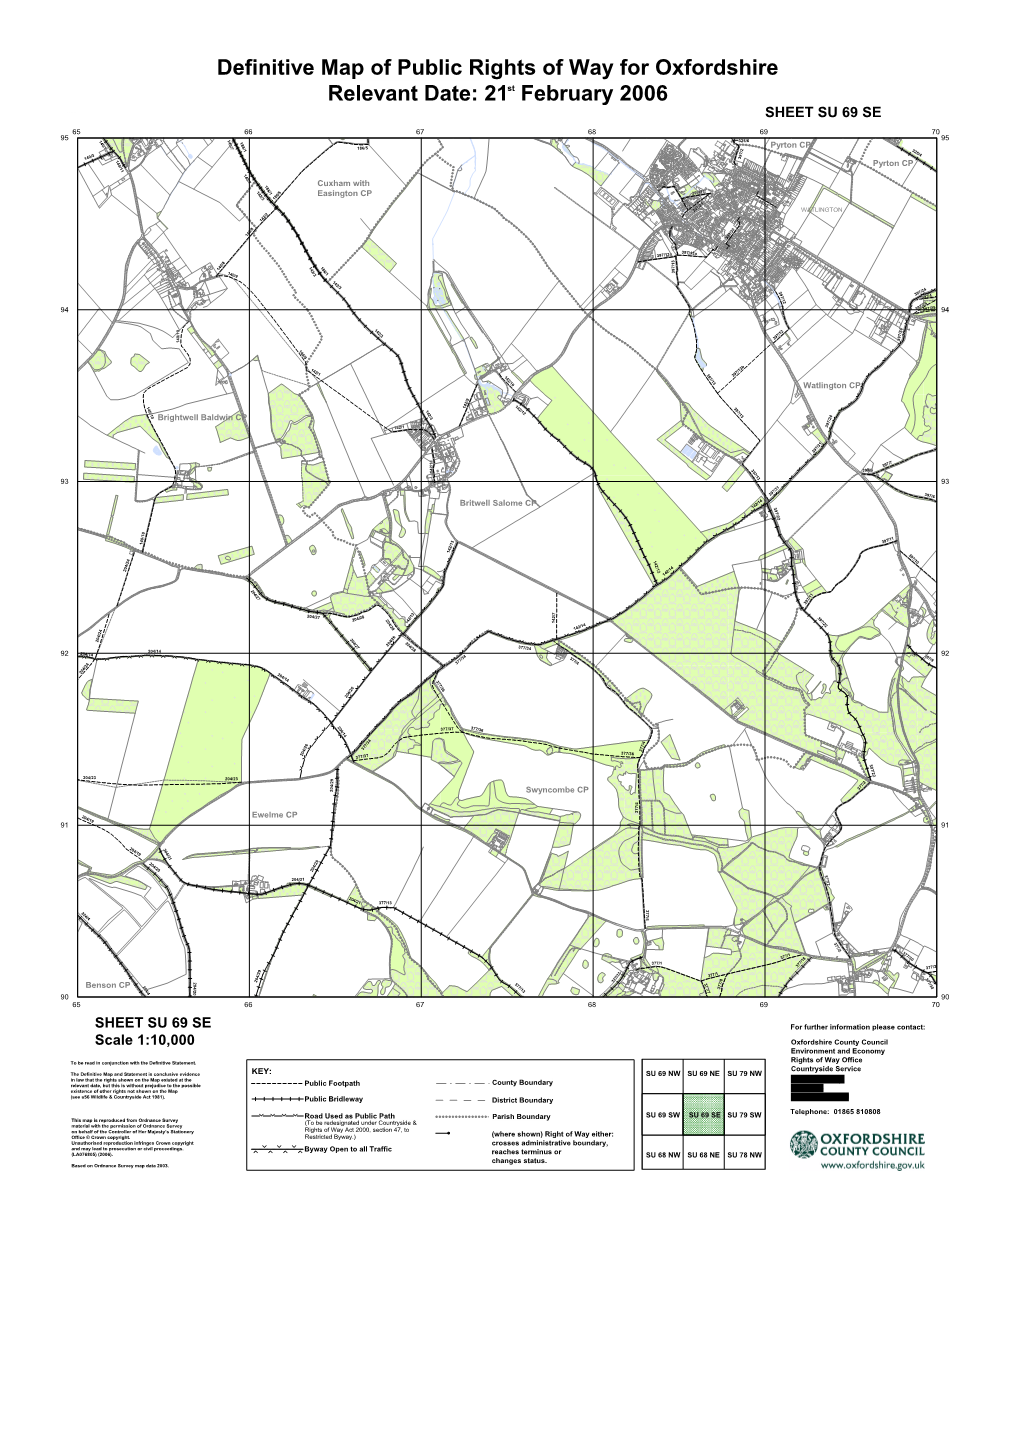 Definitive Map of Public Rights of Way for Oxfordshire Relevant Date: 21St February 2006 Colour SHEET SU 69 SE